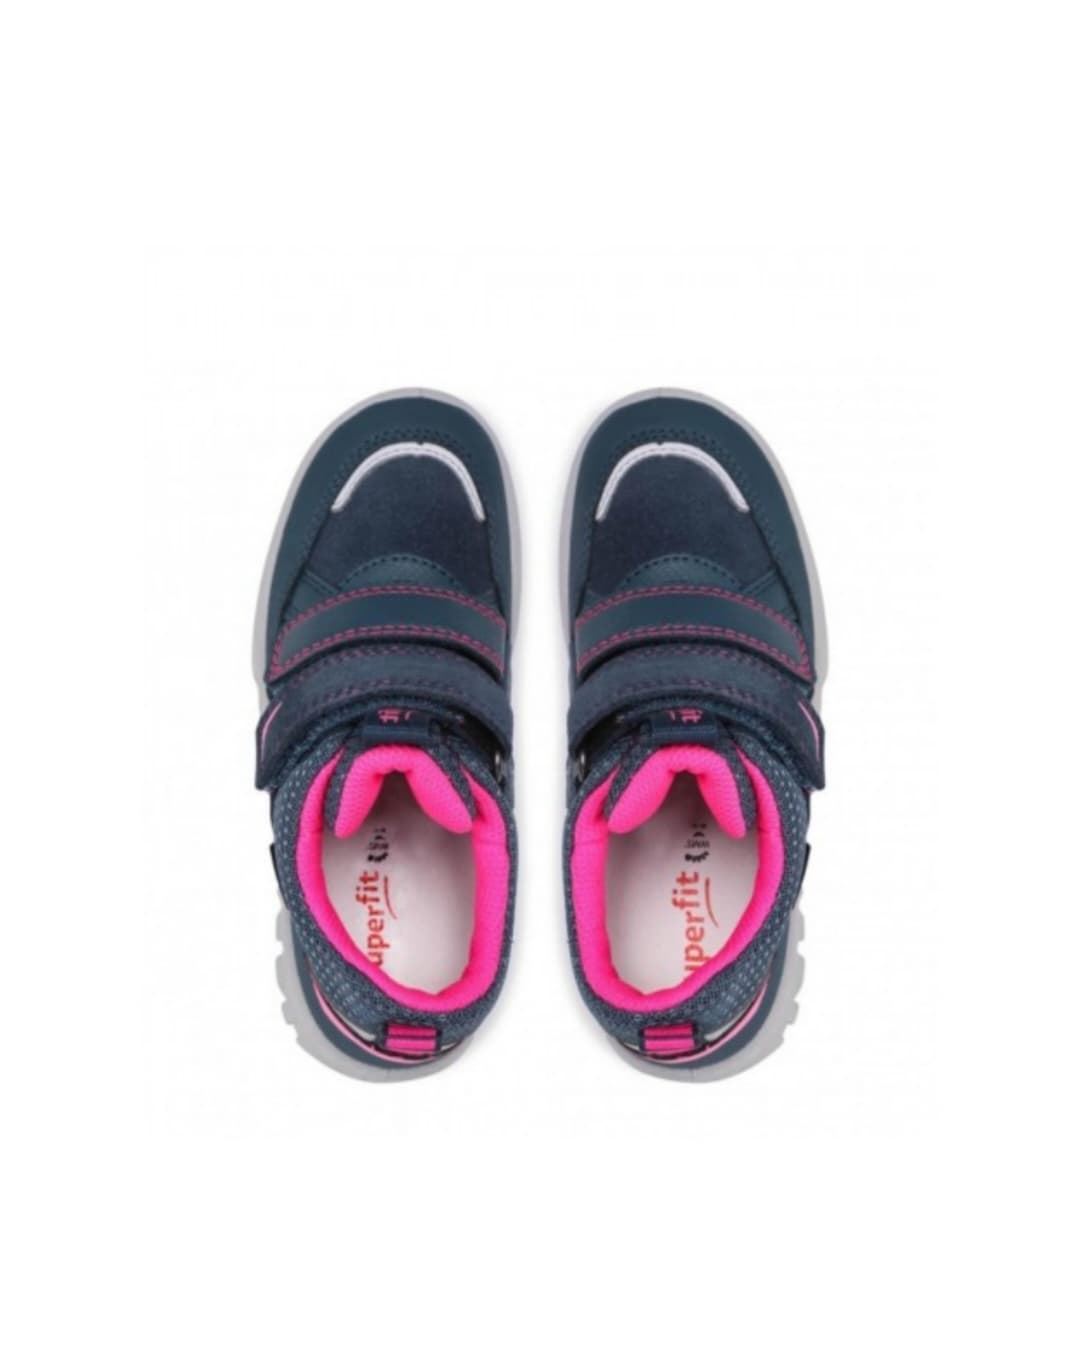 Superfit Girl's Gore-tex Shoes Blue and Pink - Image 4